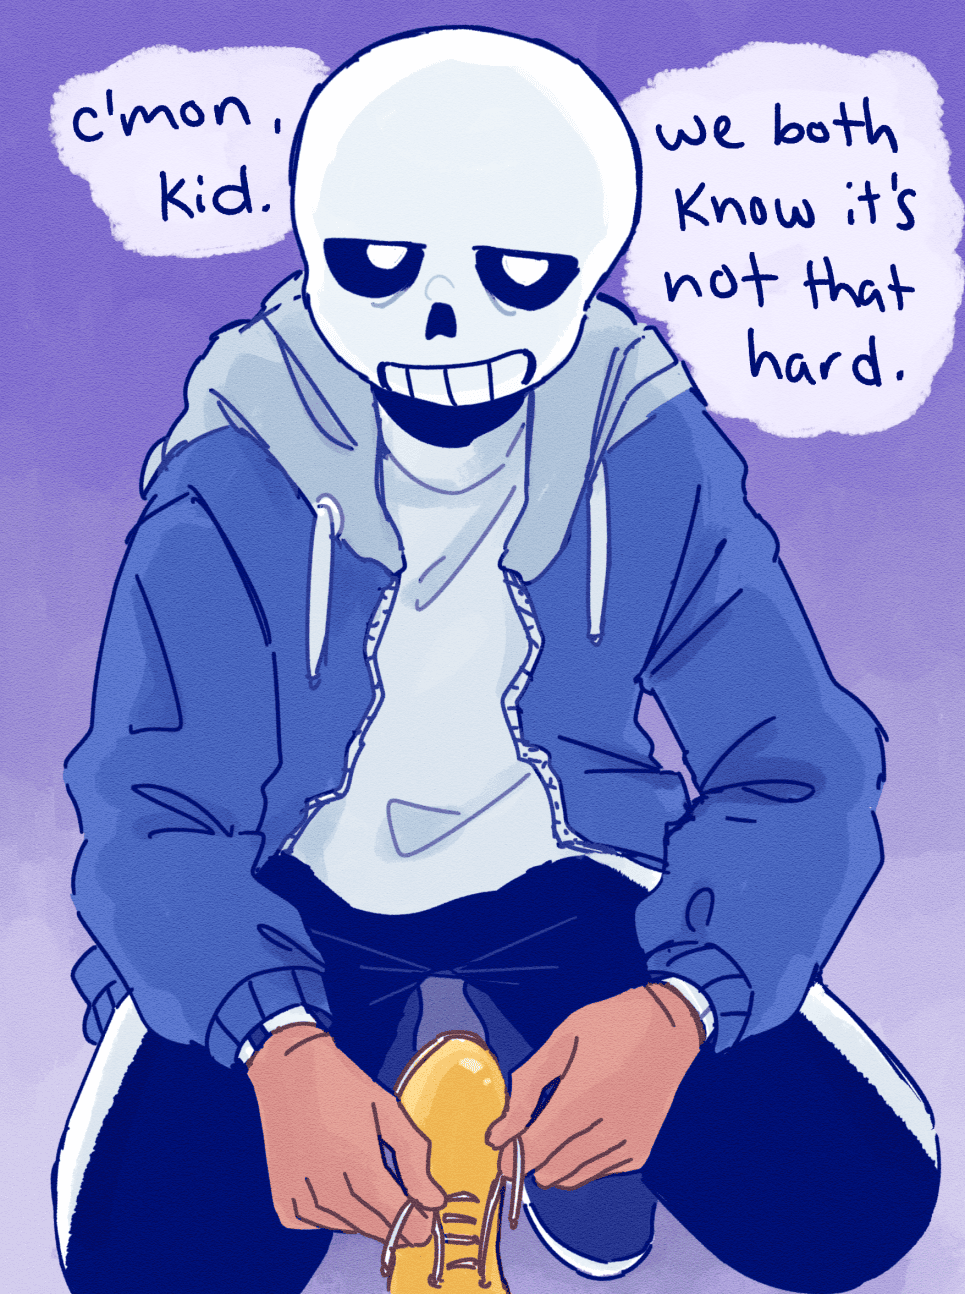 Sans crouches to tie my shoes